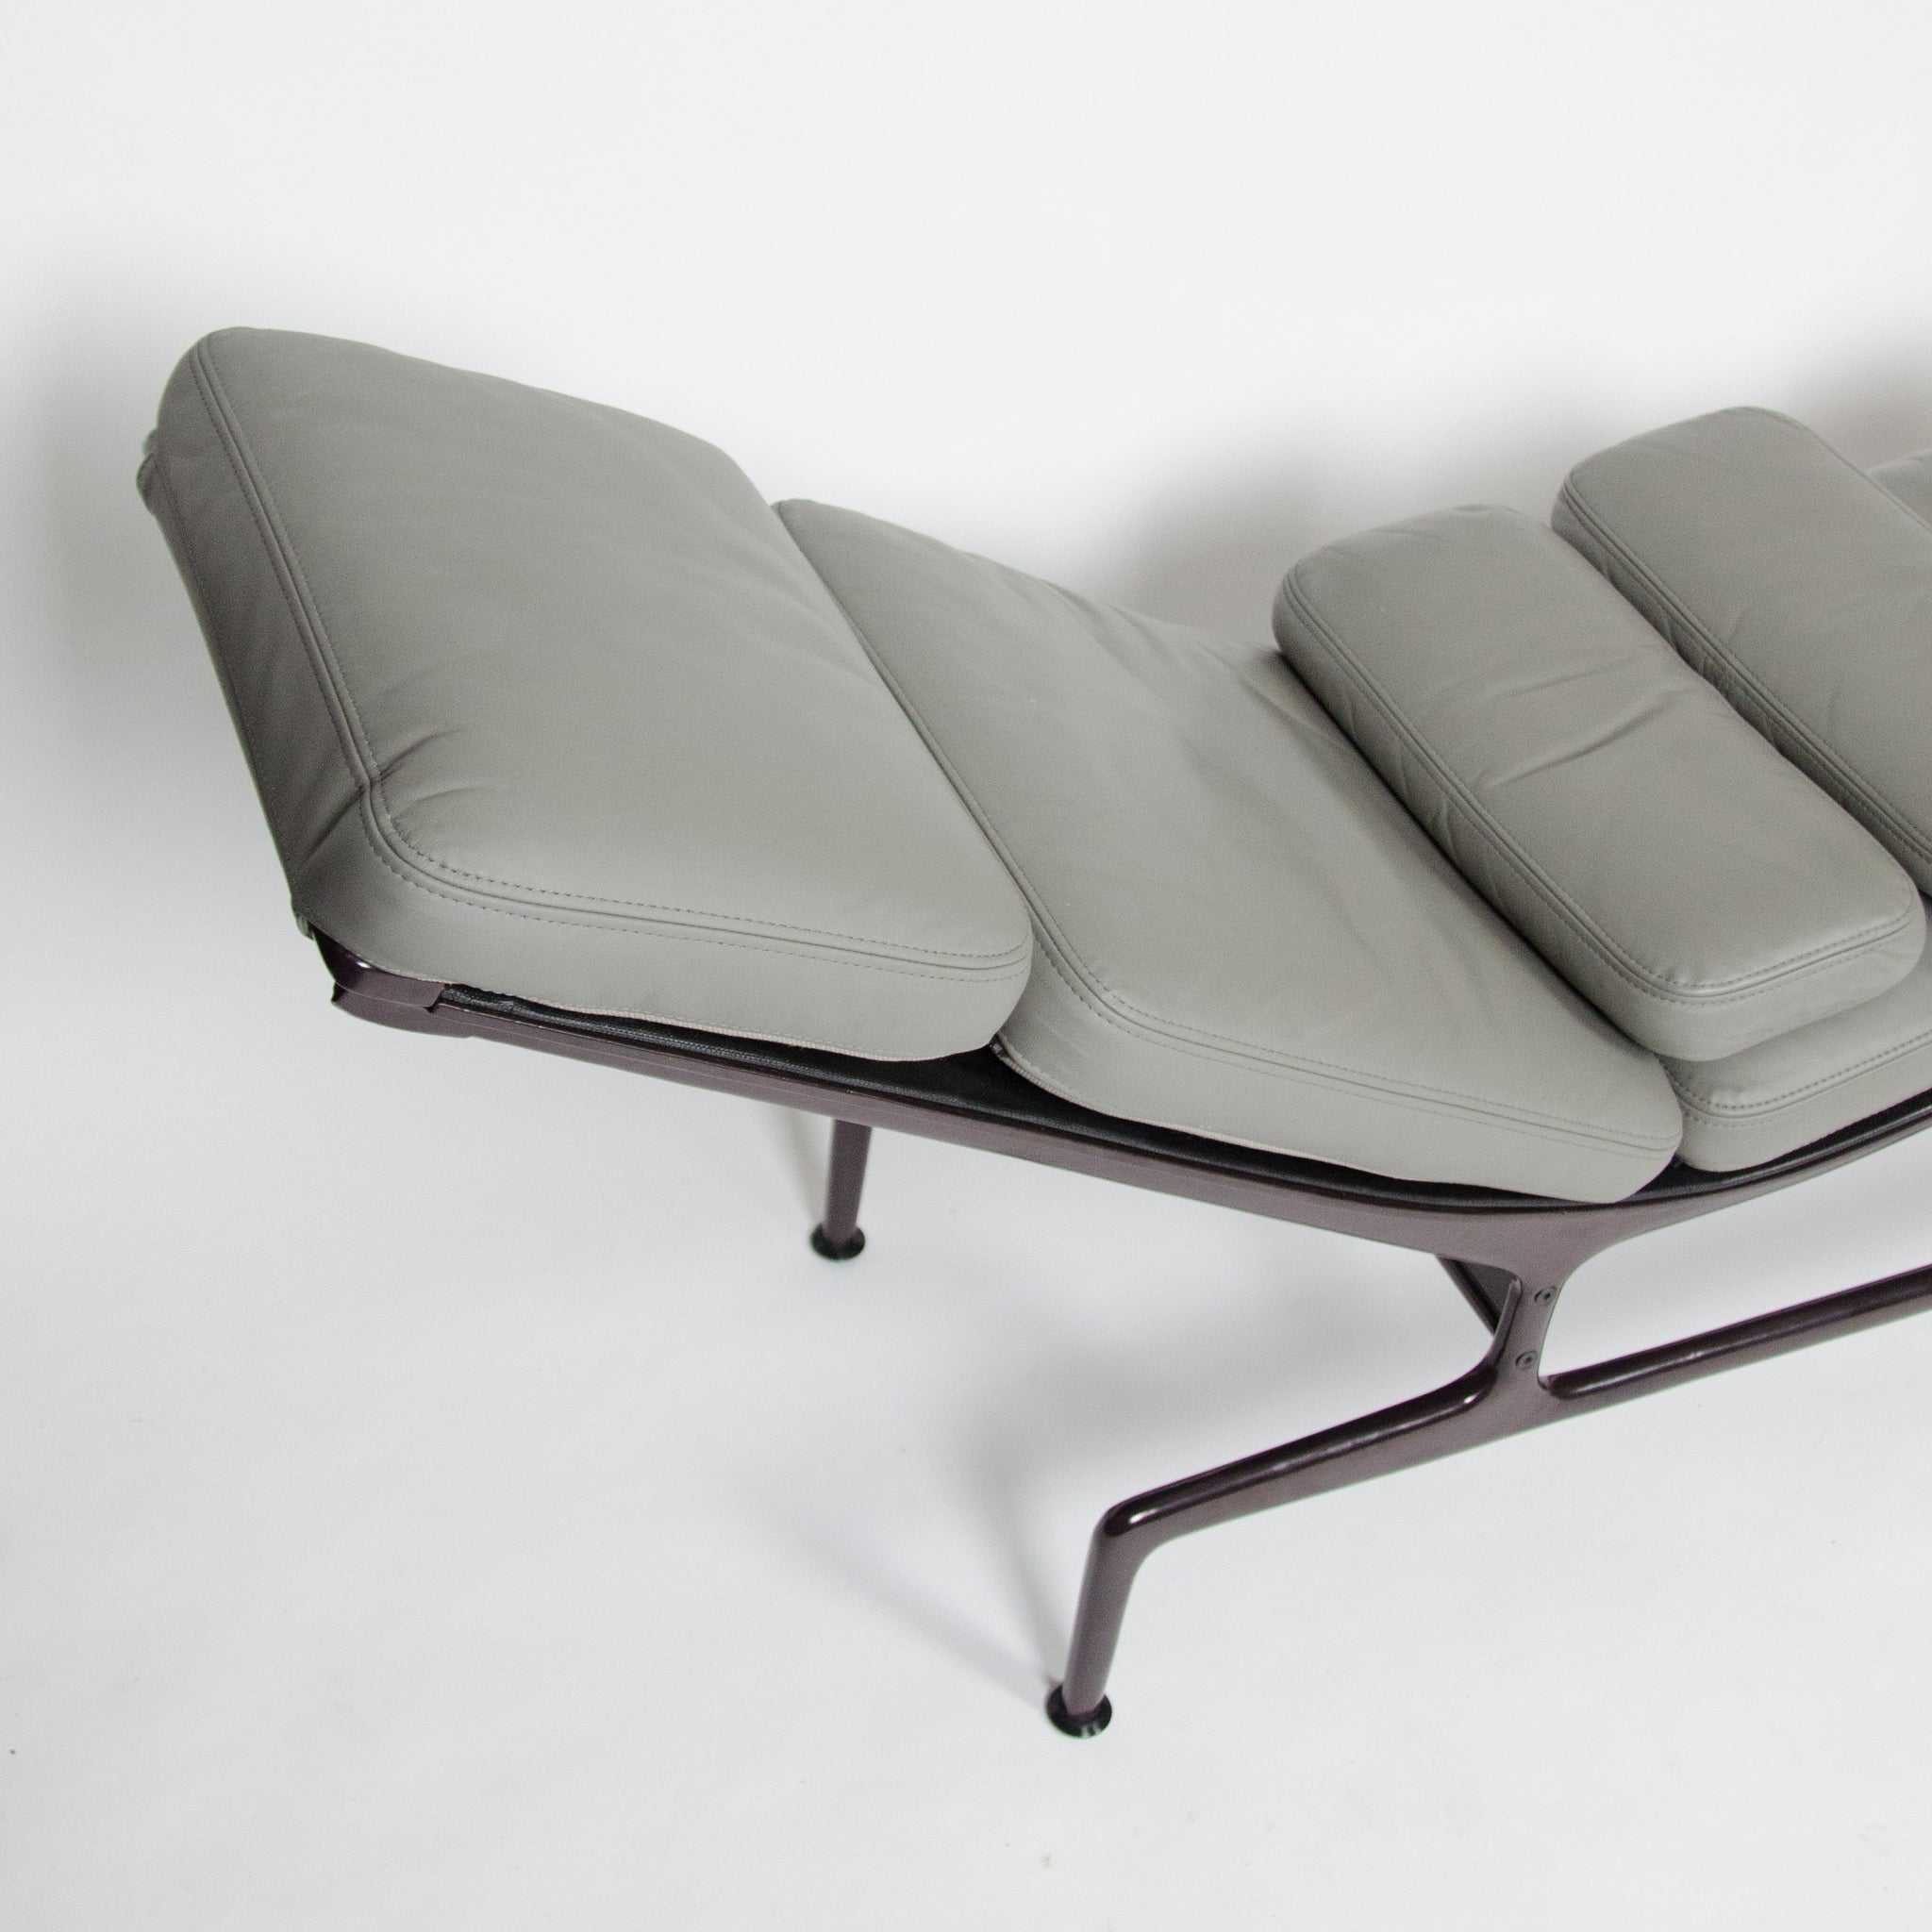 SOLD Eames Herman Miller Billy Wilder Gray and Eggplant Chaise Lounge Chair MINT